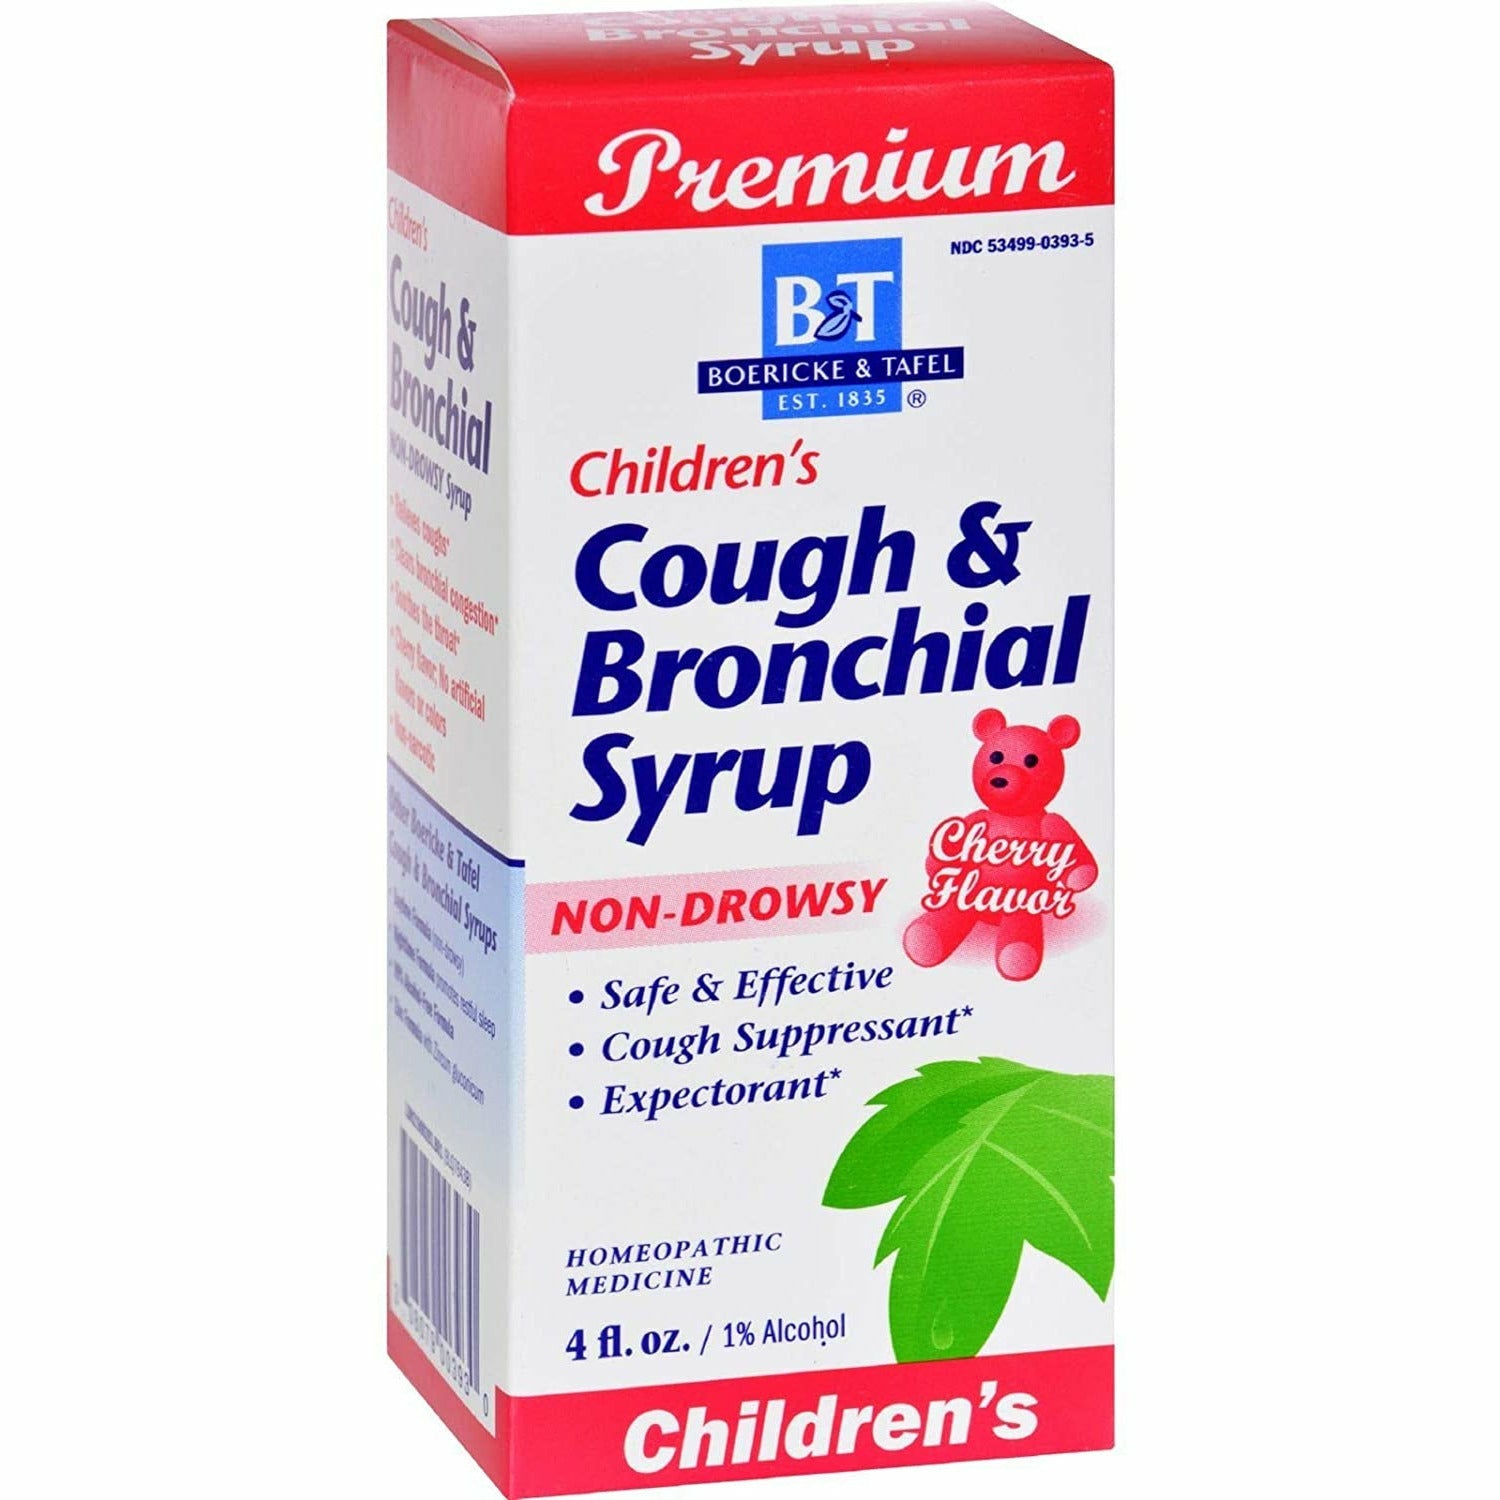 Boericke & Tafel Daytime Cough & Bronchial Syrup Non-Drowsy Homeopathic